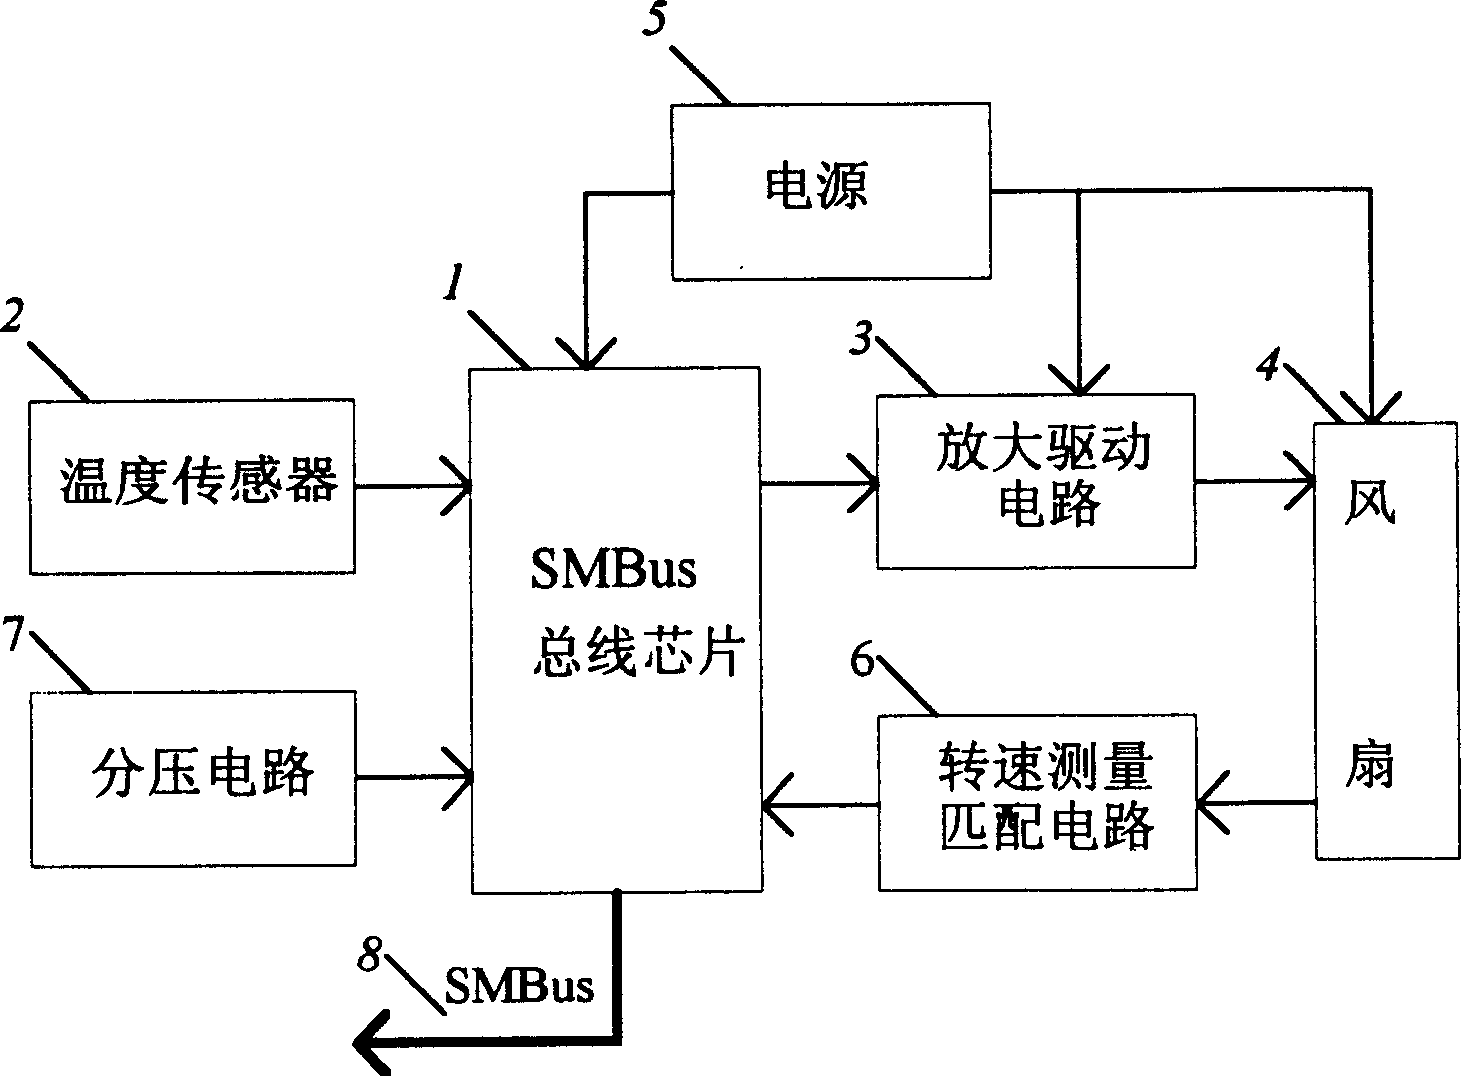 Method for monitoring device by SMBus chip on PCI plate and its device